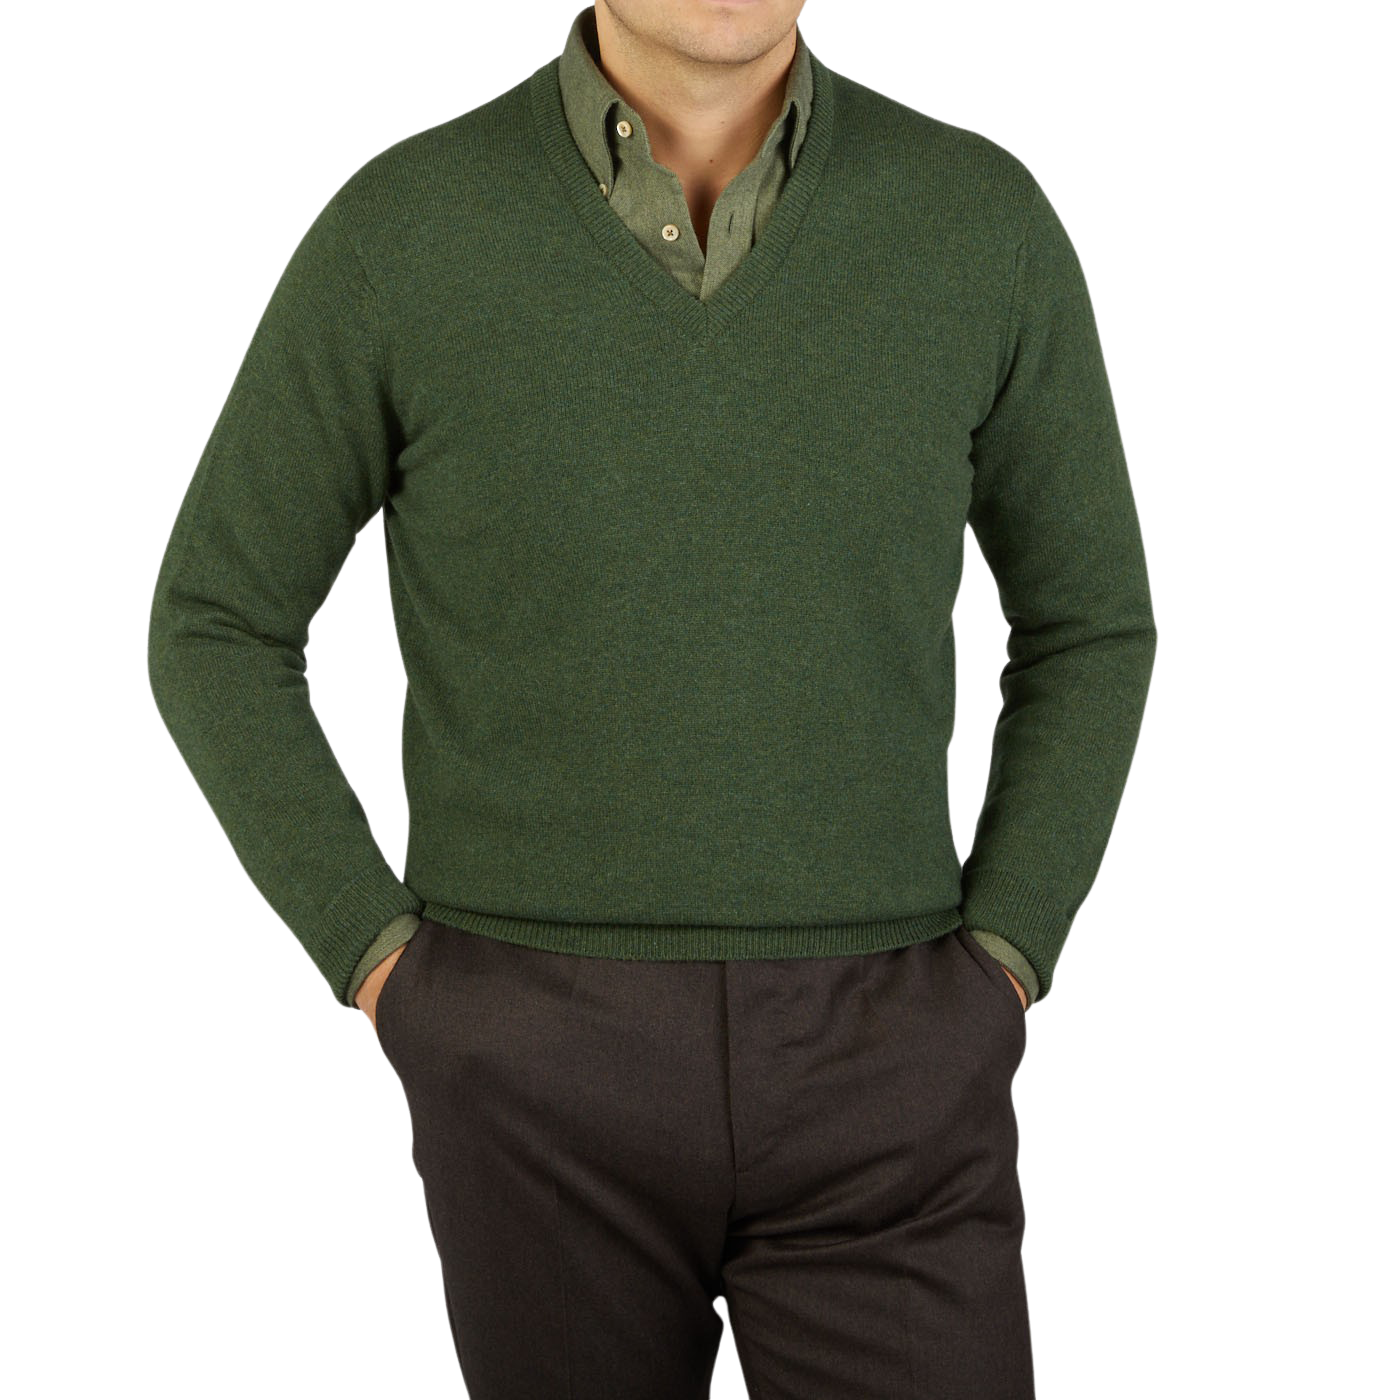 A man wearing a Rosemary Green V-Neck Lambswool Sweater by William Lockie for warmth.